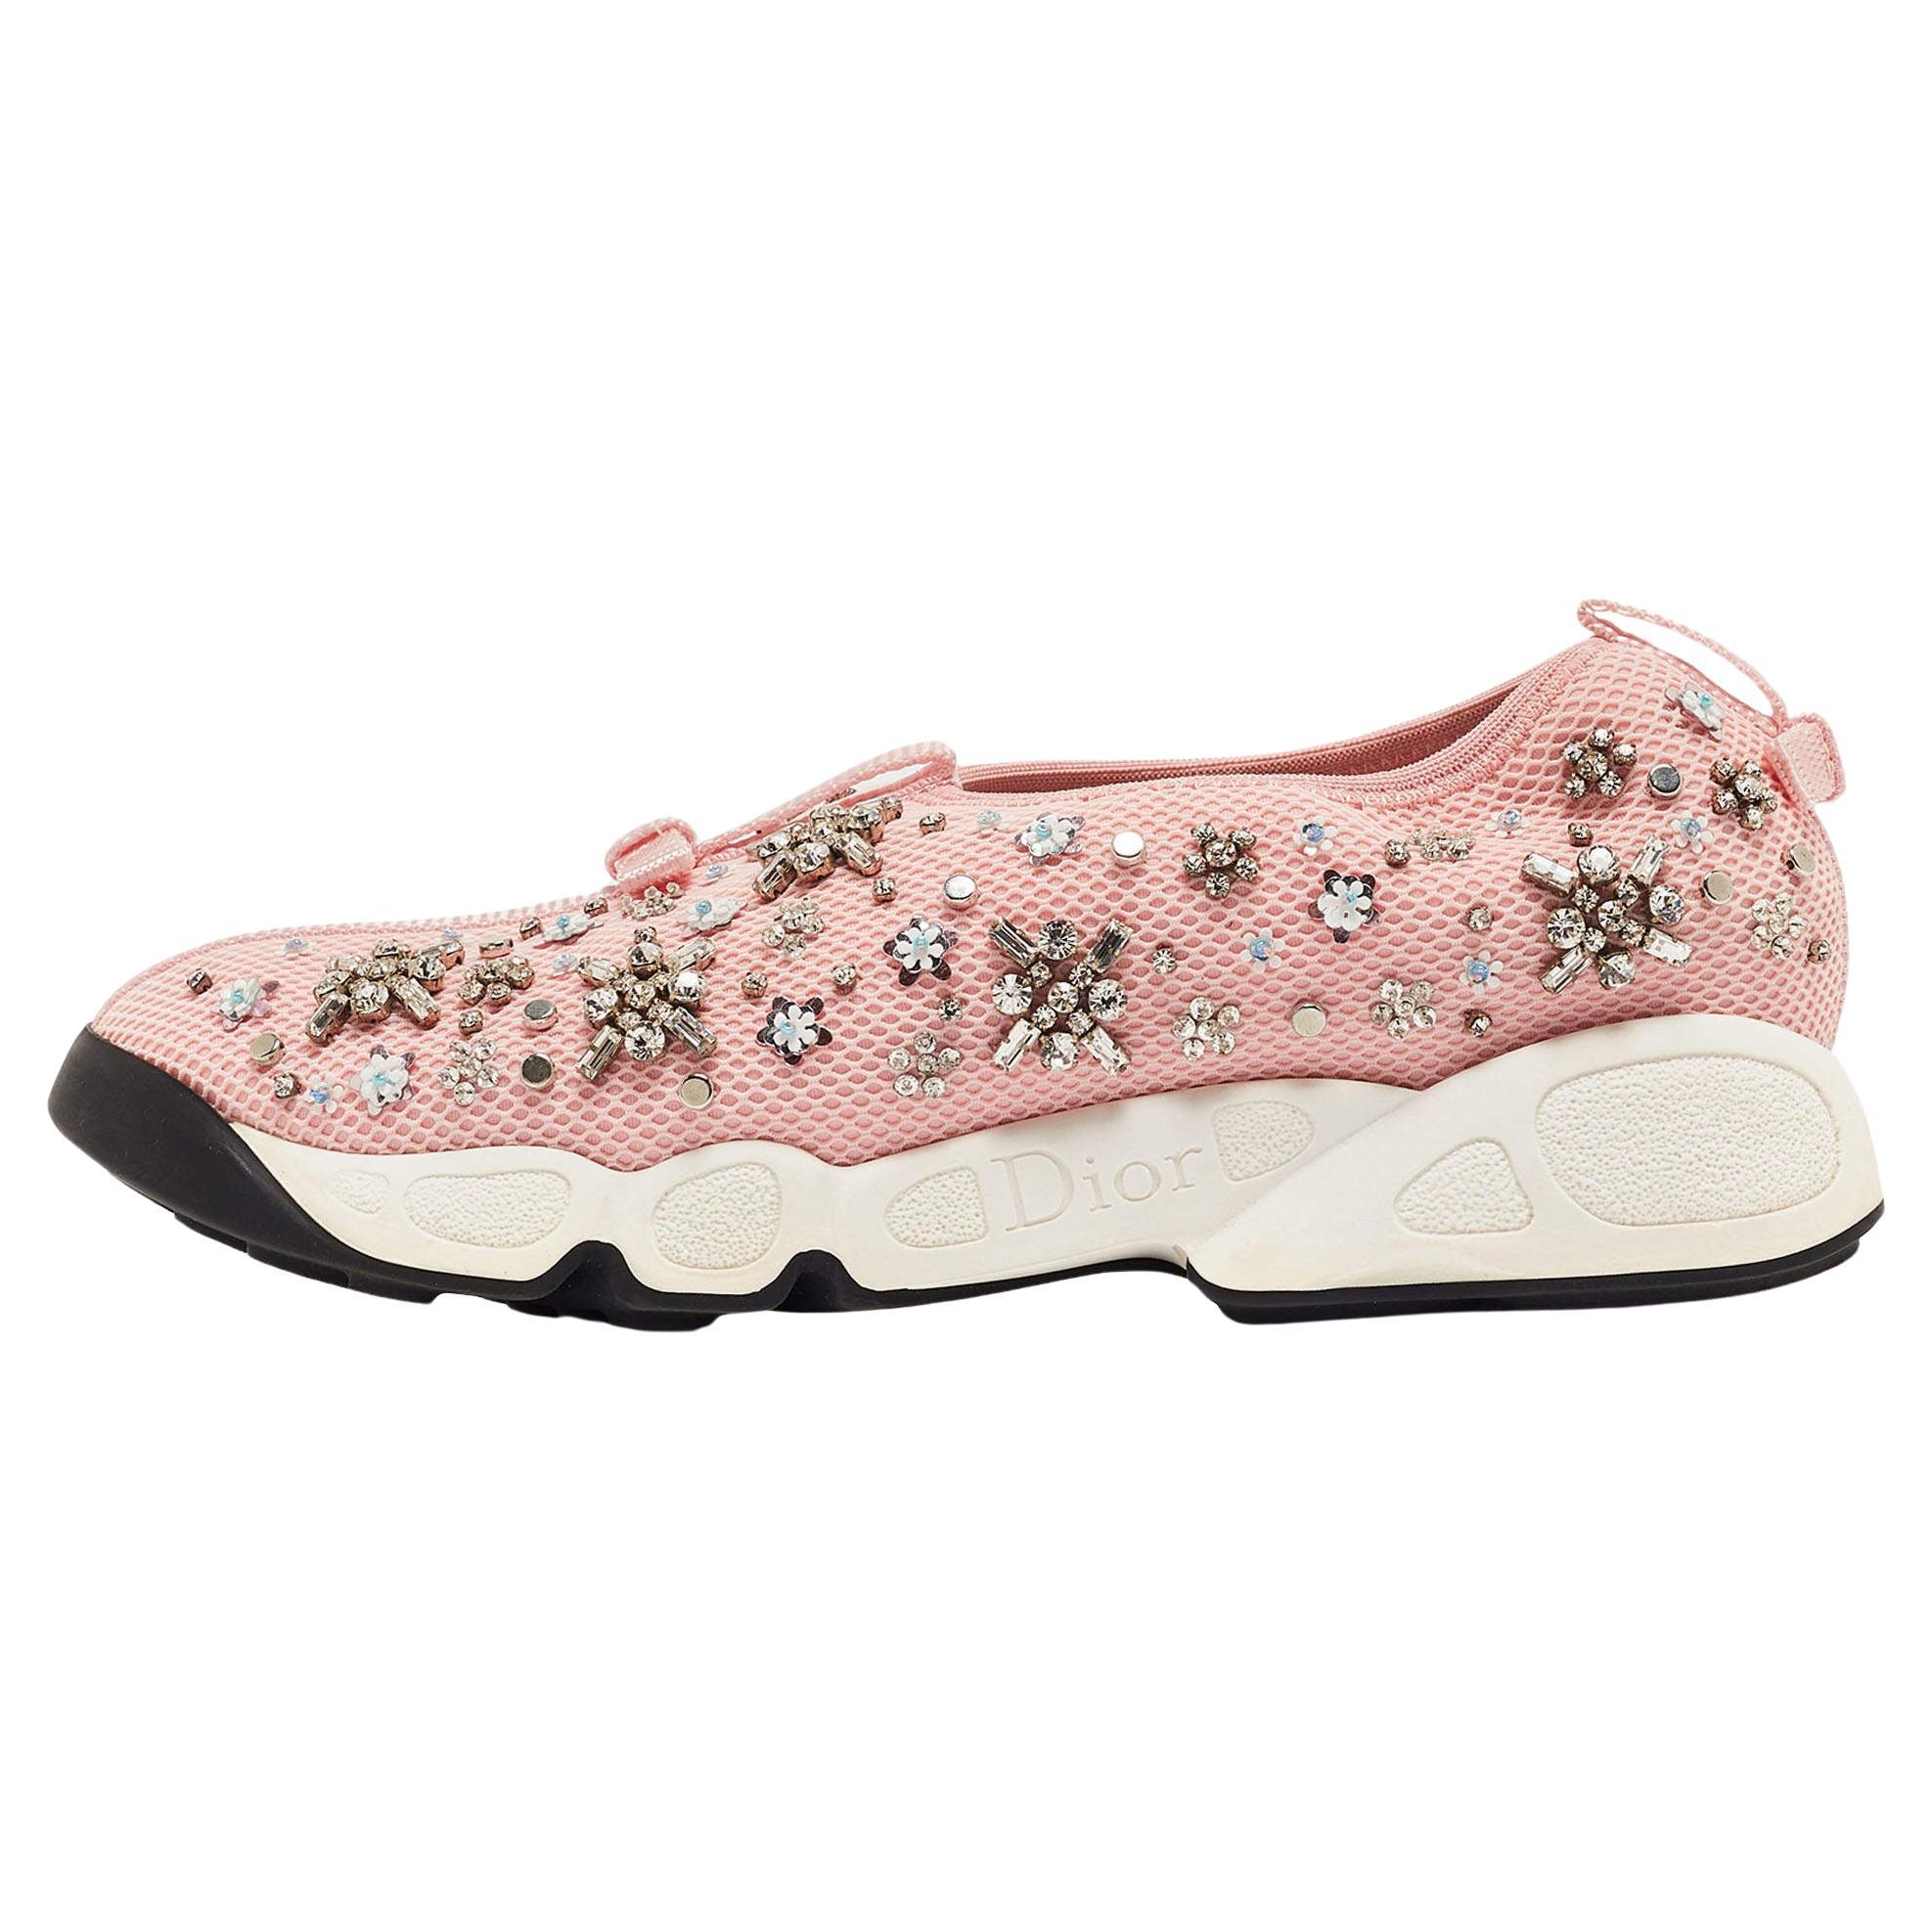 Dior Pink Embellished Mesh Fusion Sneakers Size 36 For Sale